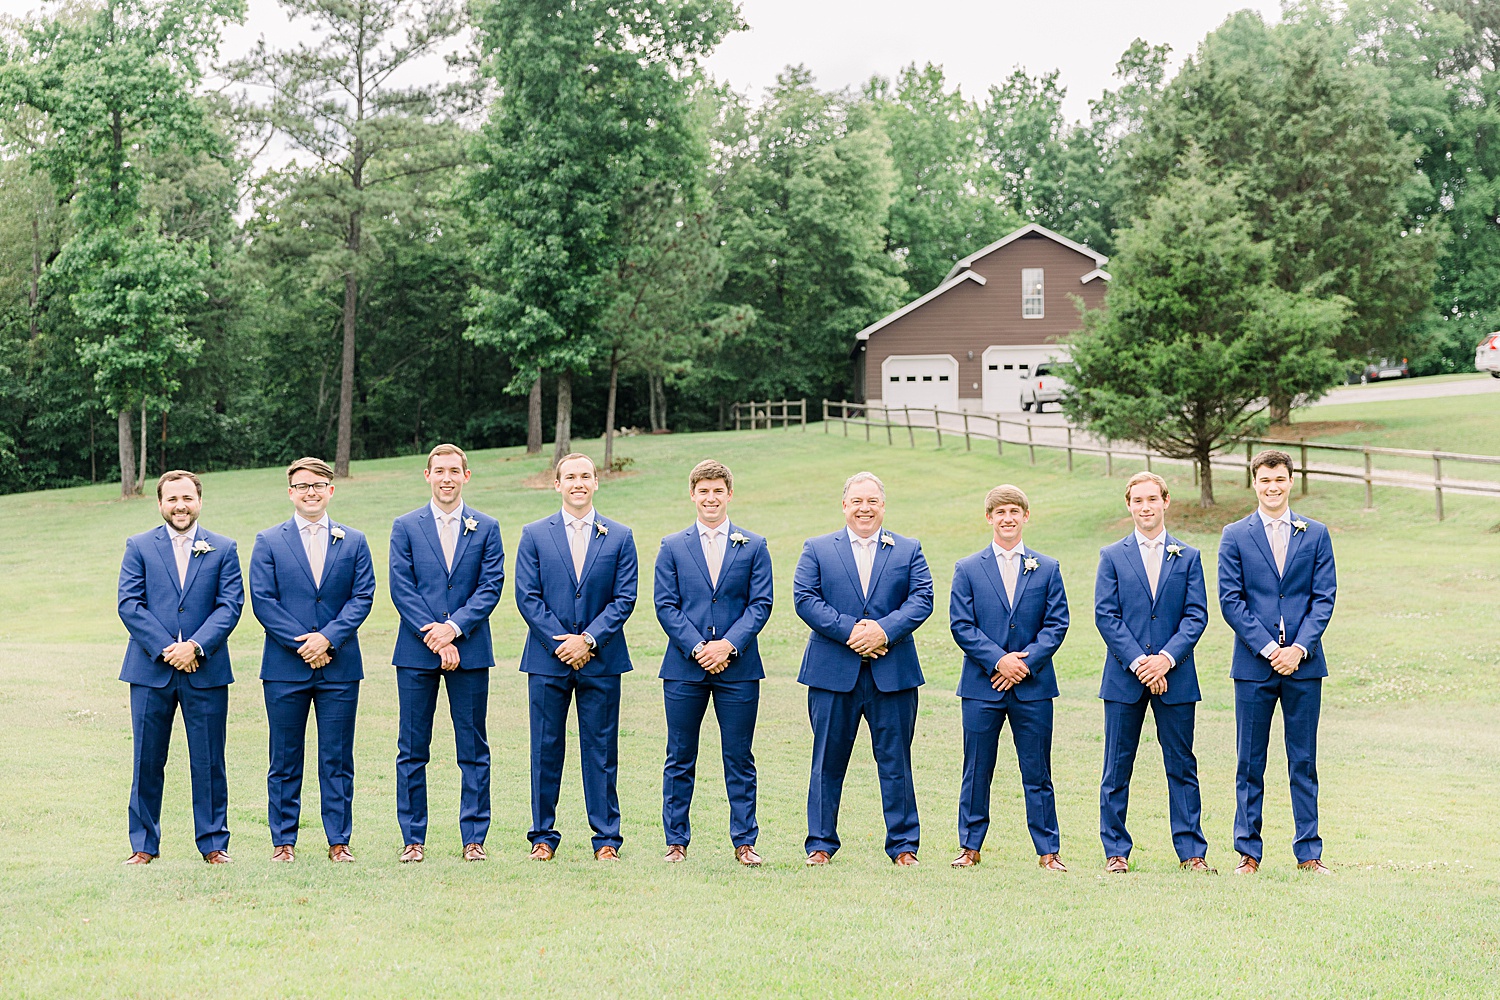 Groom and Groomsmen stand together before wedding ceremony